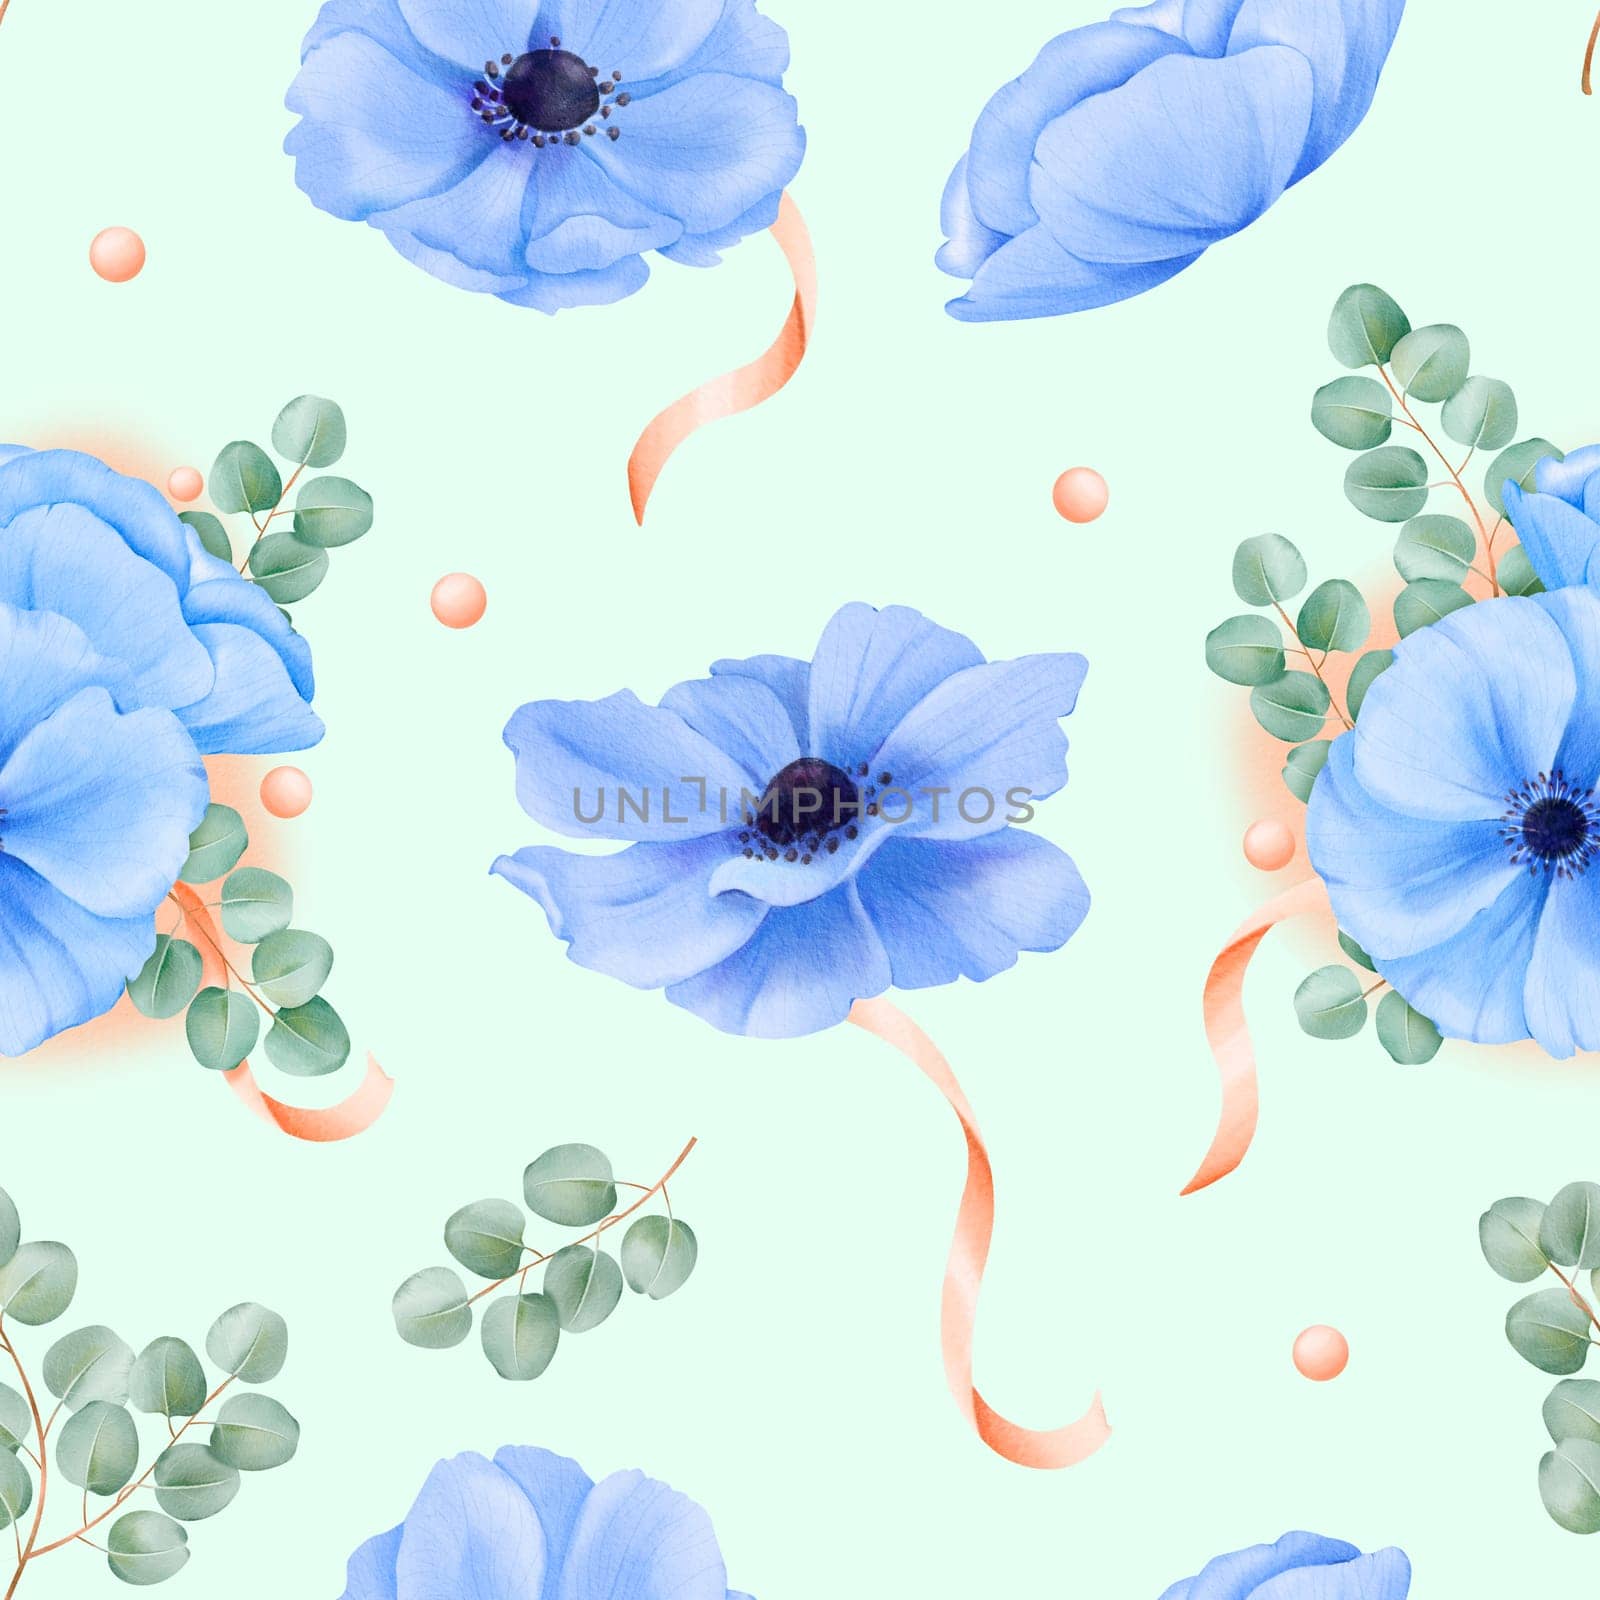 A seamless pattern watercolor floral motifs set against a celestial blue background. Delicate blue anemones, satin ribbons, sparkling rhinestones, and airy eucalyptus leaves embellish the design by Art_Mari_Ka